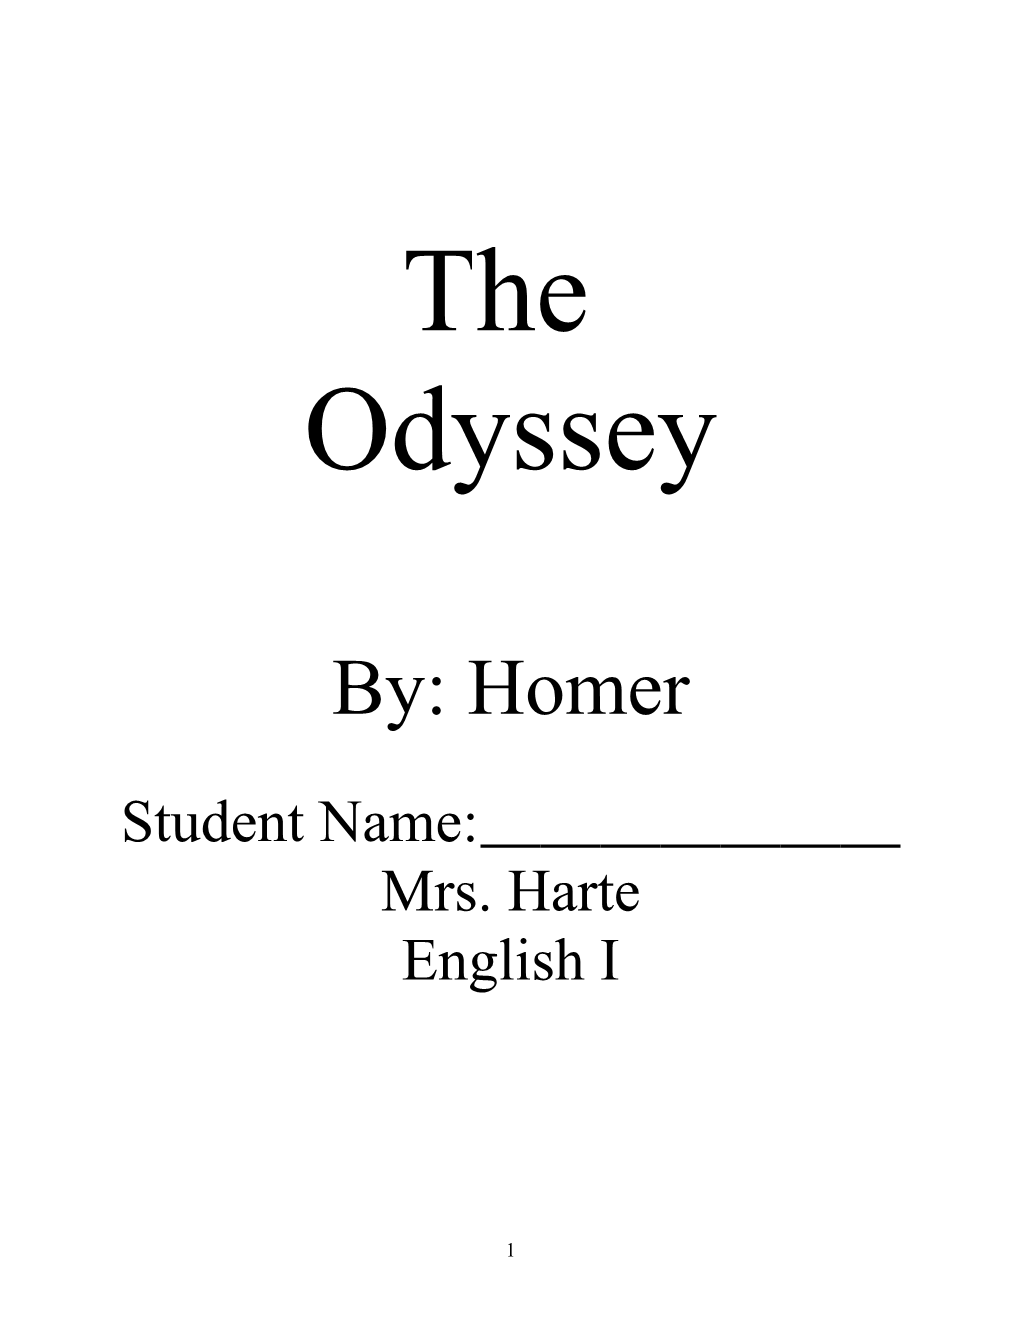 The Odyssey: Character List